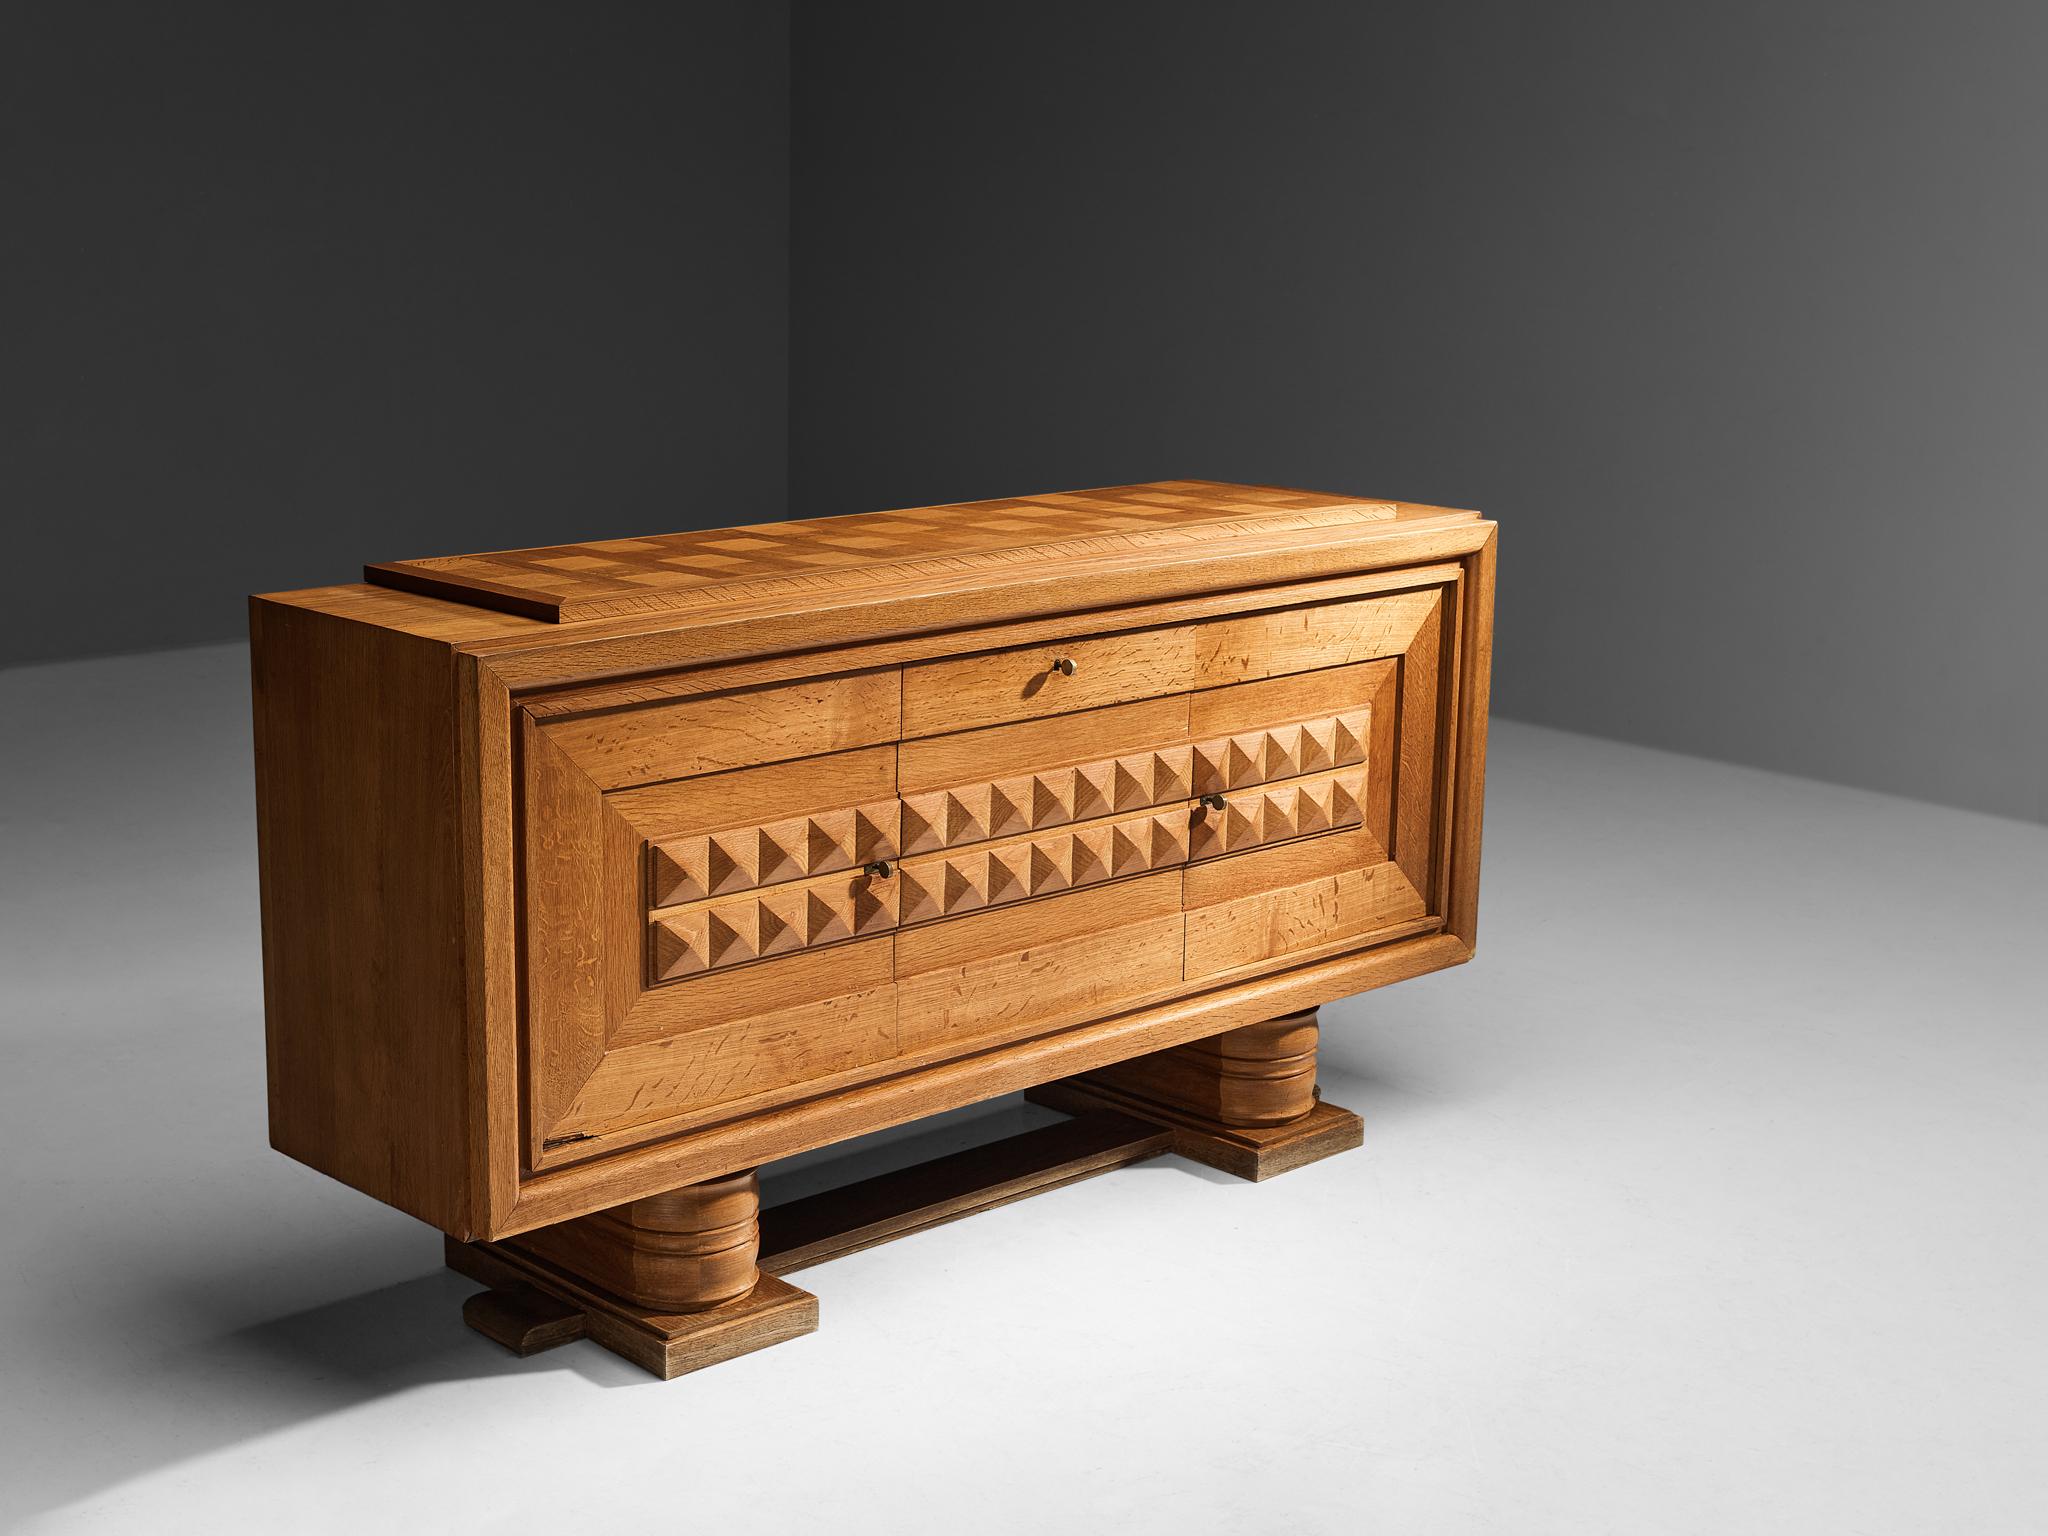 Attributed to Charles Dudouyt, sideboard, oak, oak veneer, brass, France 1940s.

This exceptional credenza undoubtedly breathes the Late Art Deco Period of the 1940s. Excellent craftsmanship is combined with a well-balanced eye for the composition